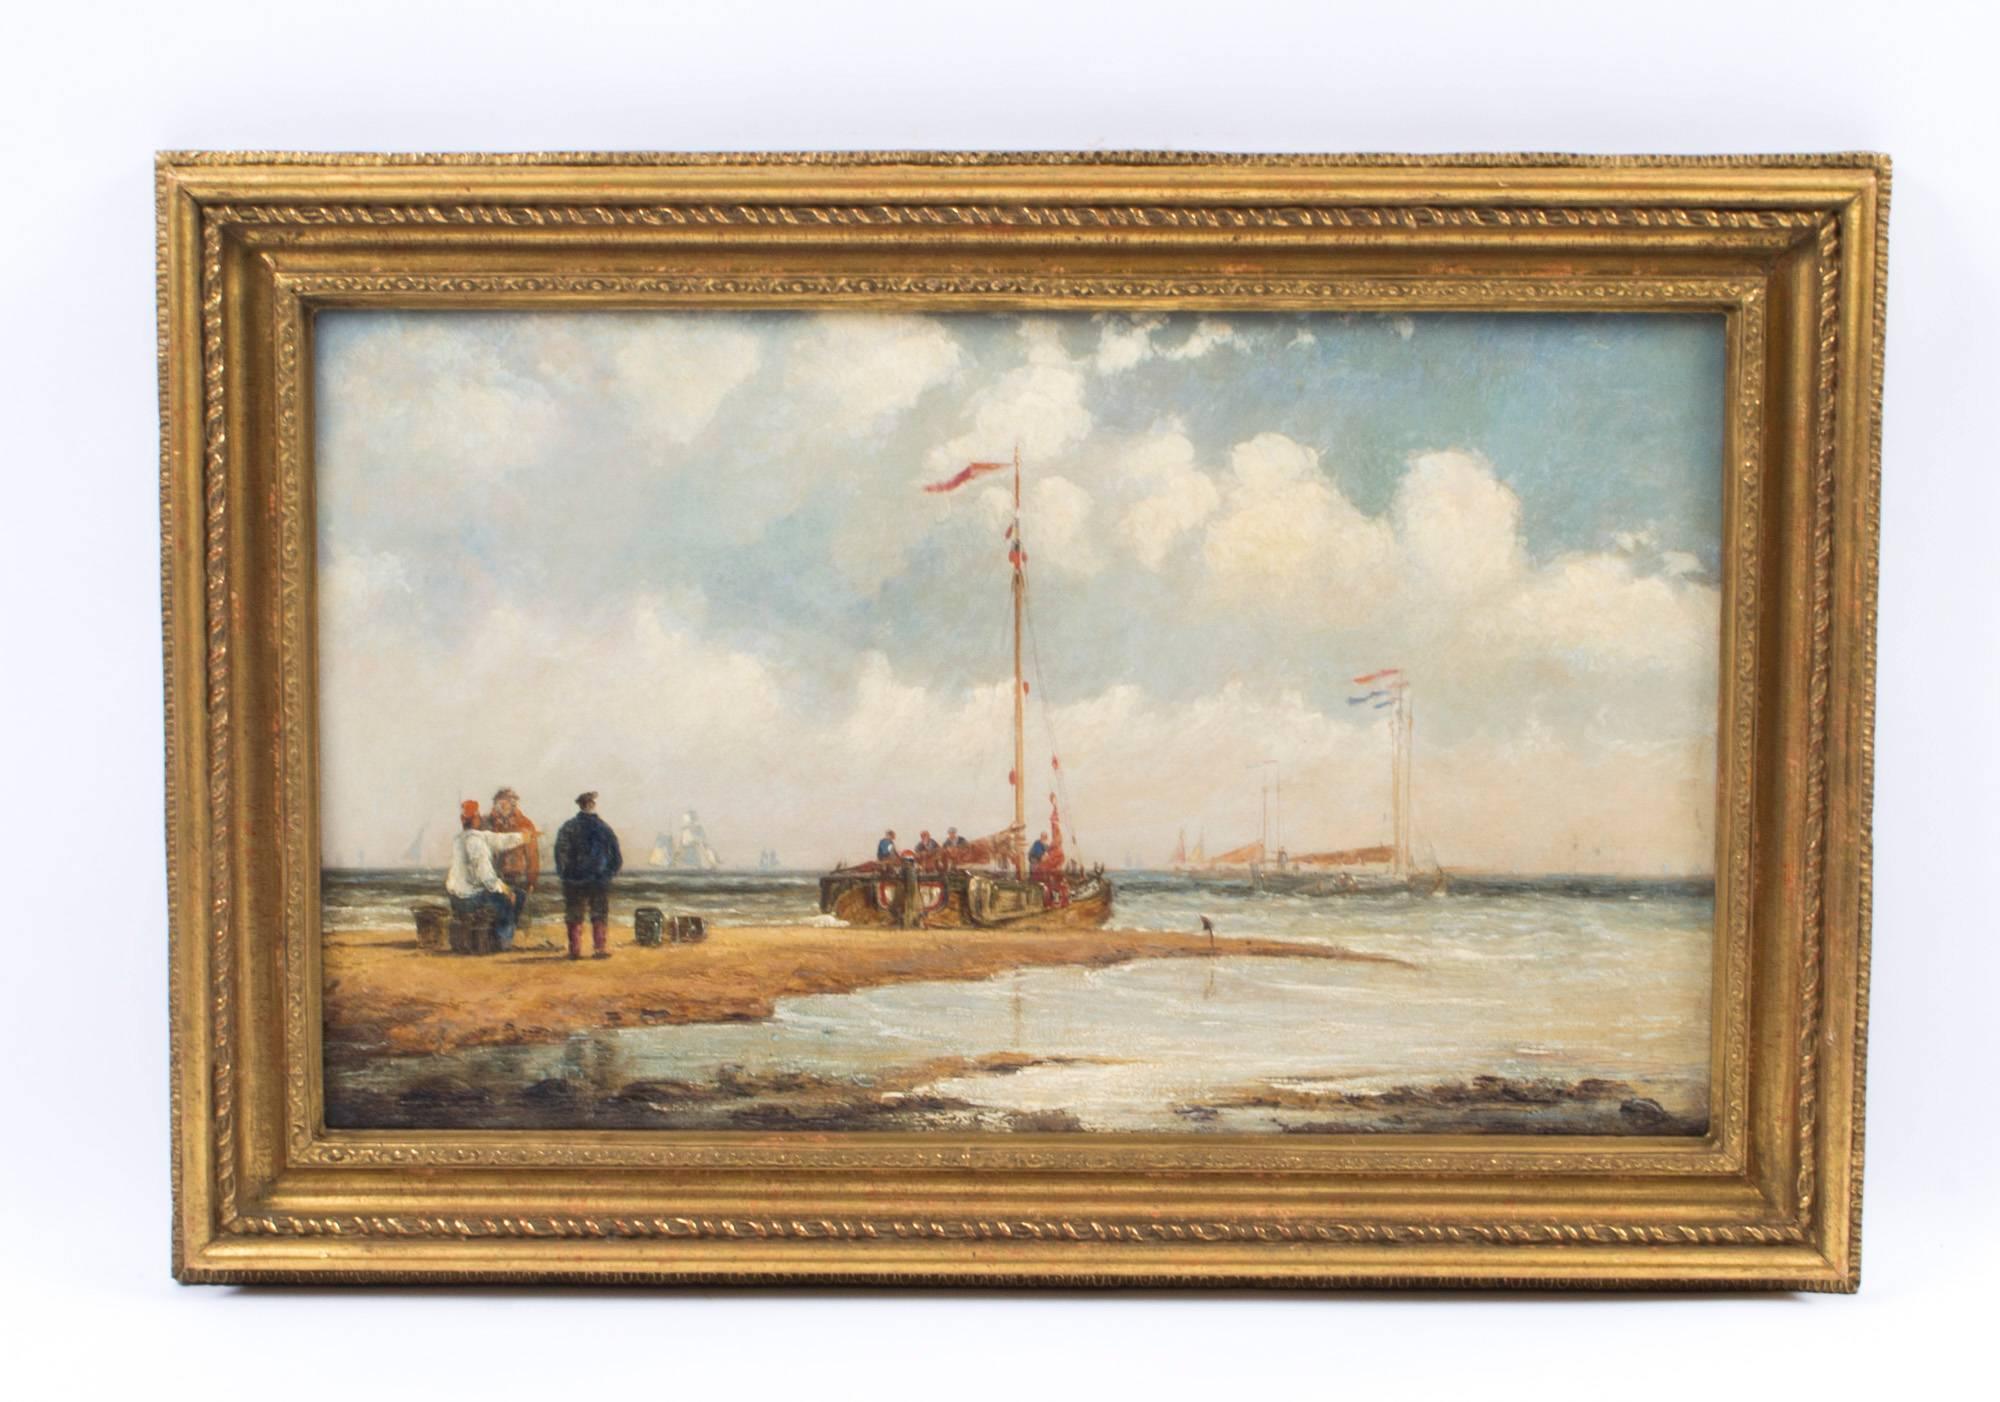 This is a delightful pair of oil on canvas seascapes of beaches, circa 1850 in date.

This delightful pair is skilfully painted in the English school; the first features a scene with fishermen on a beach with boats sailing on the horizon.

The